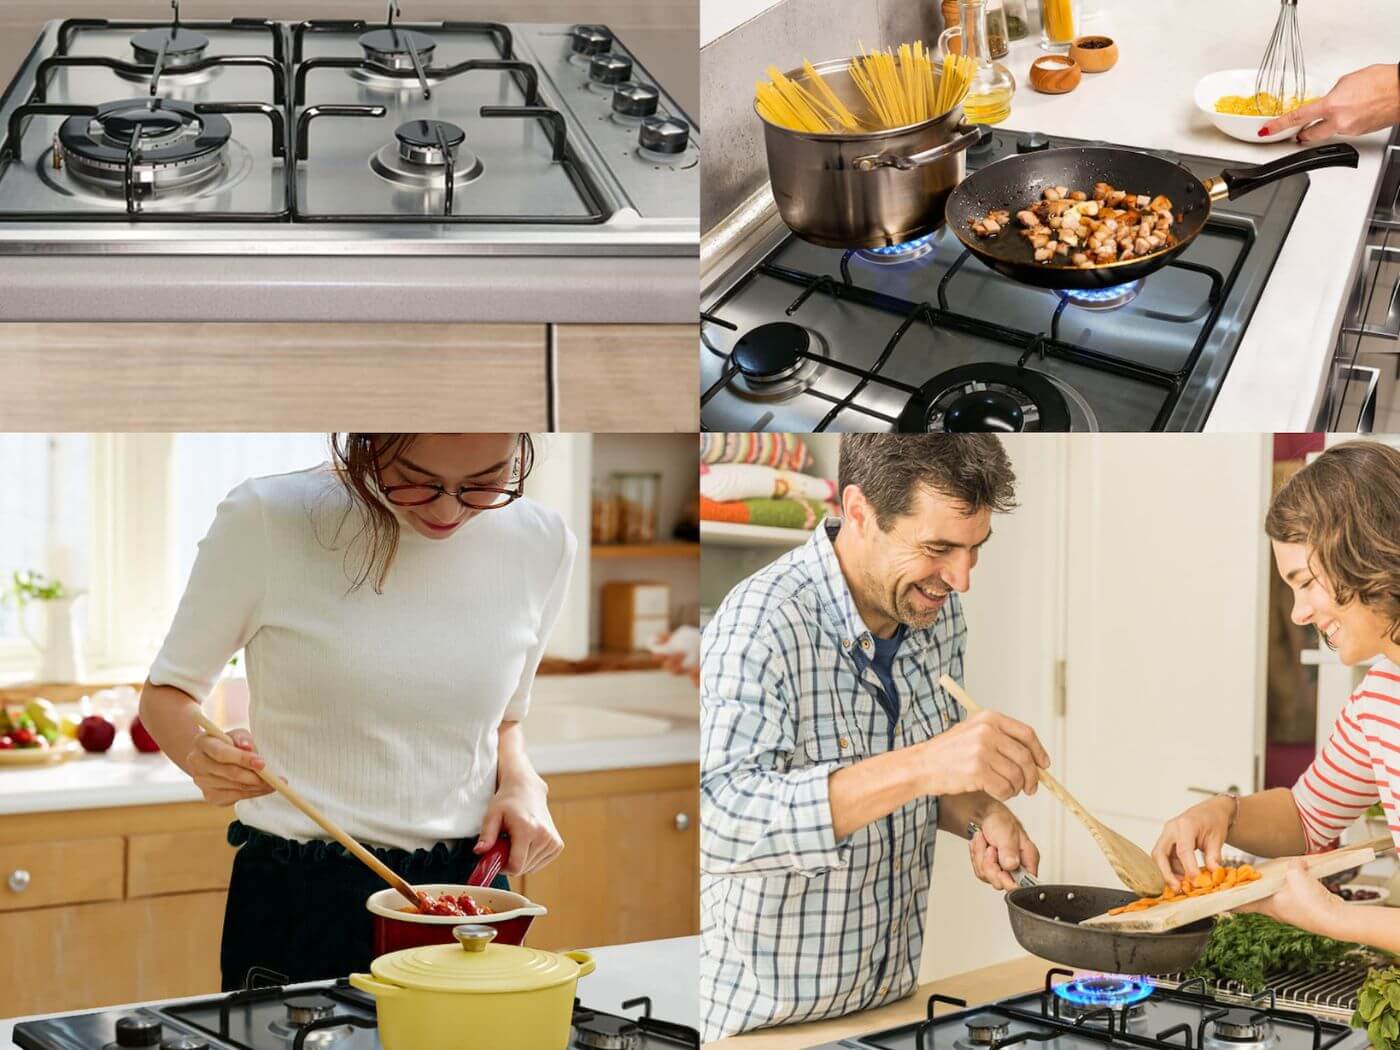 gas cooktop with downdraft